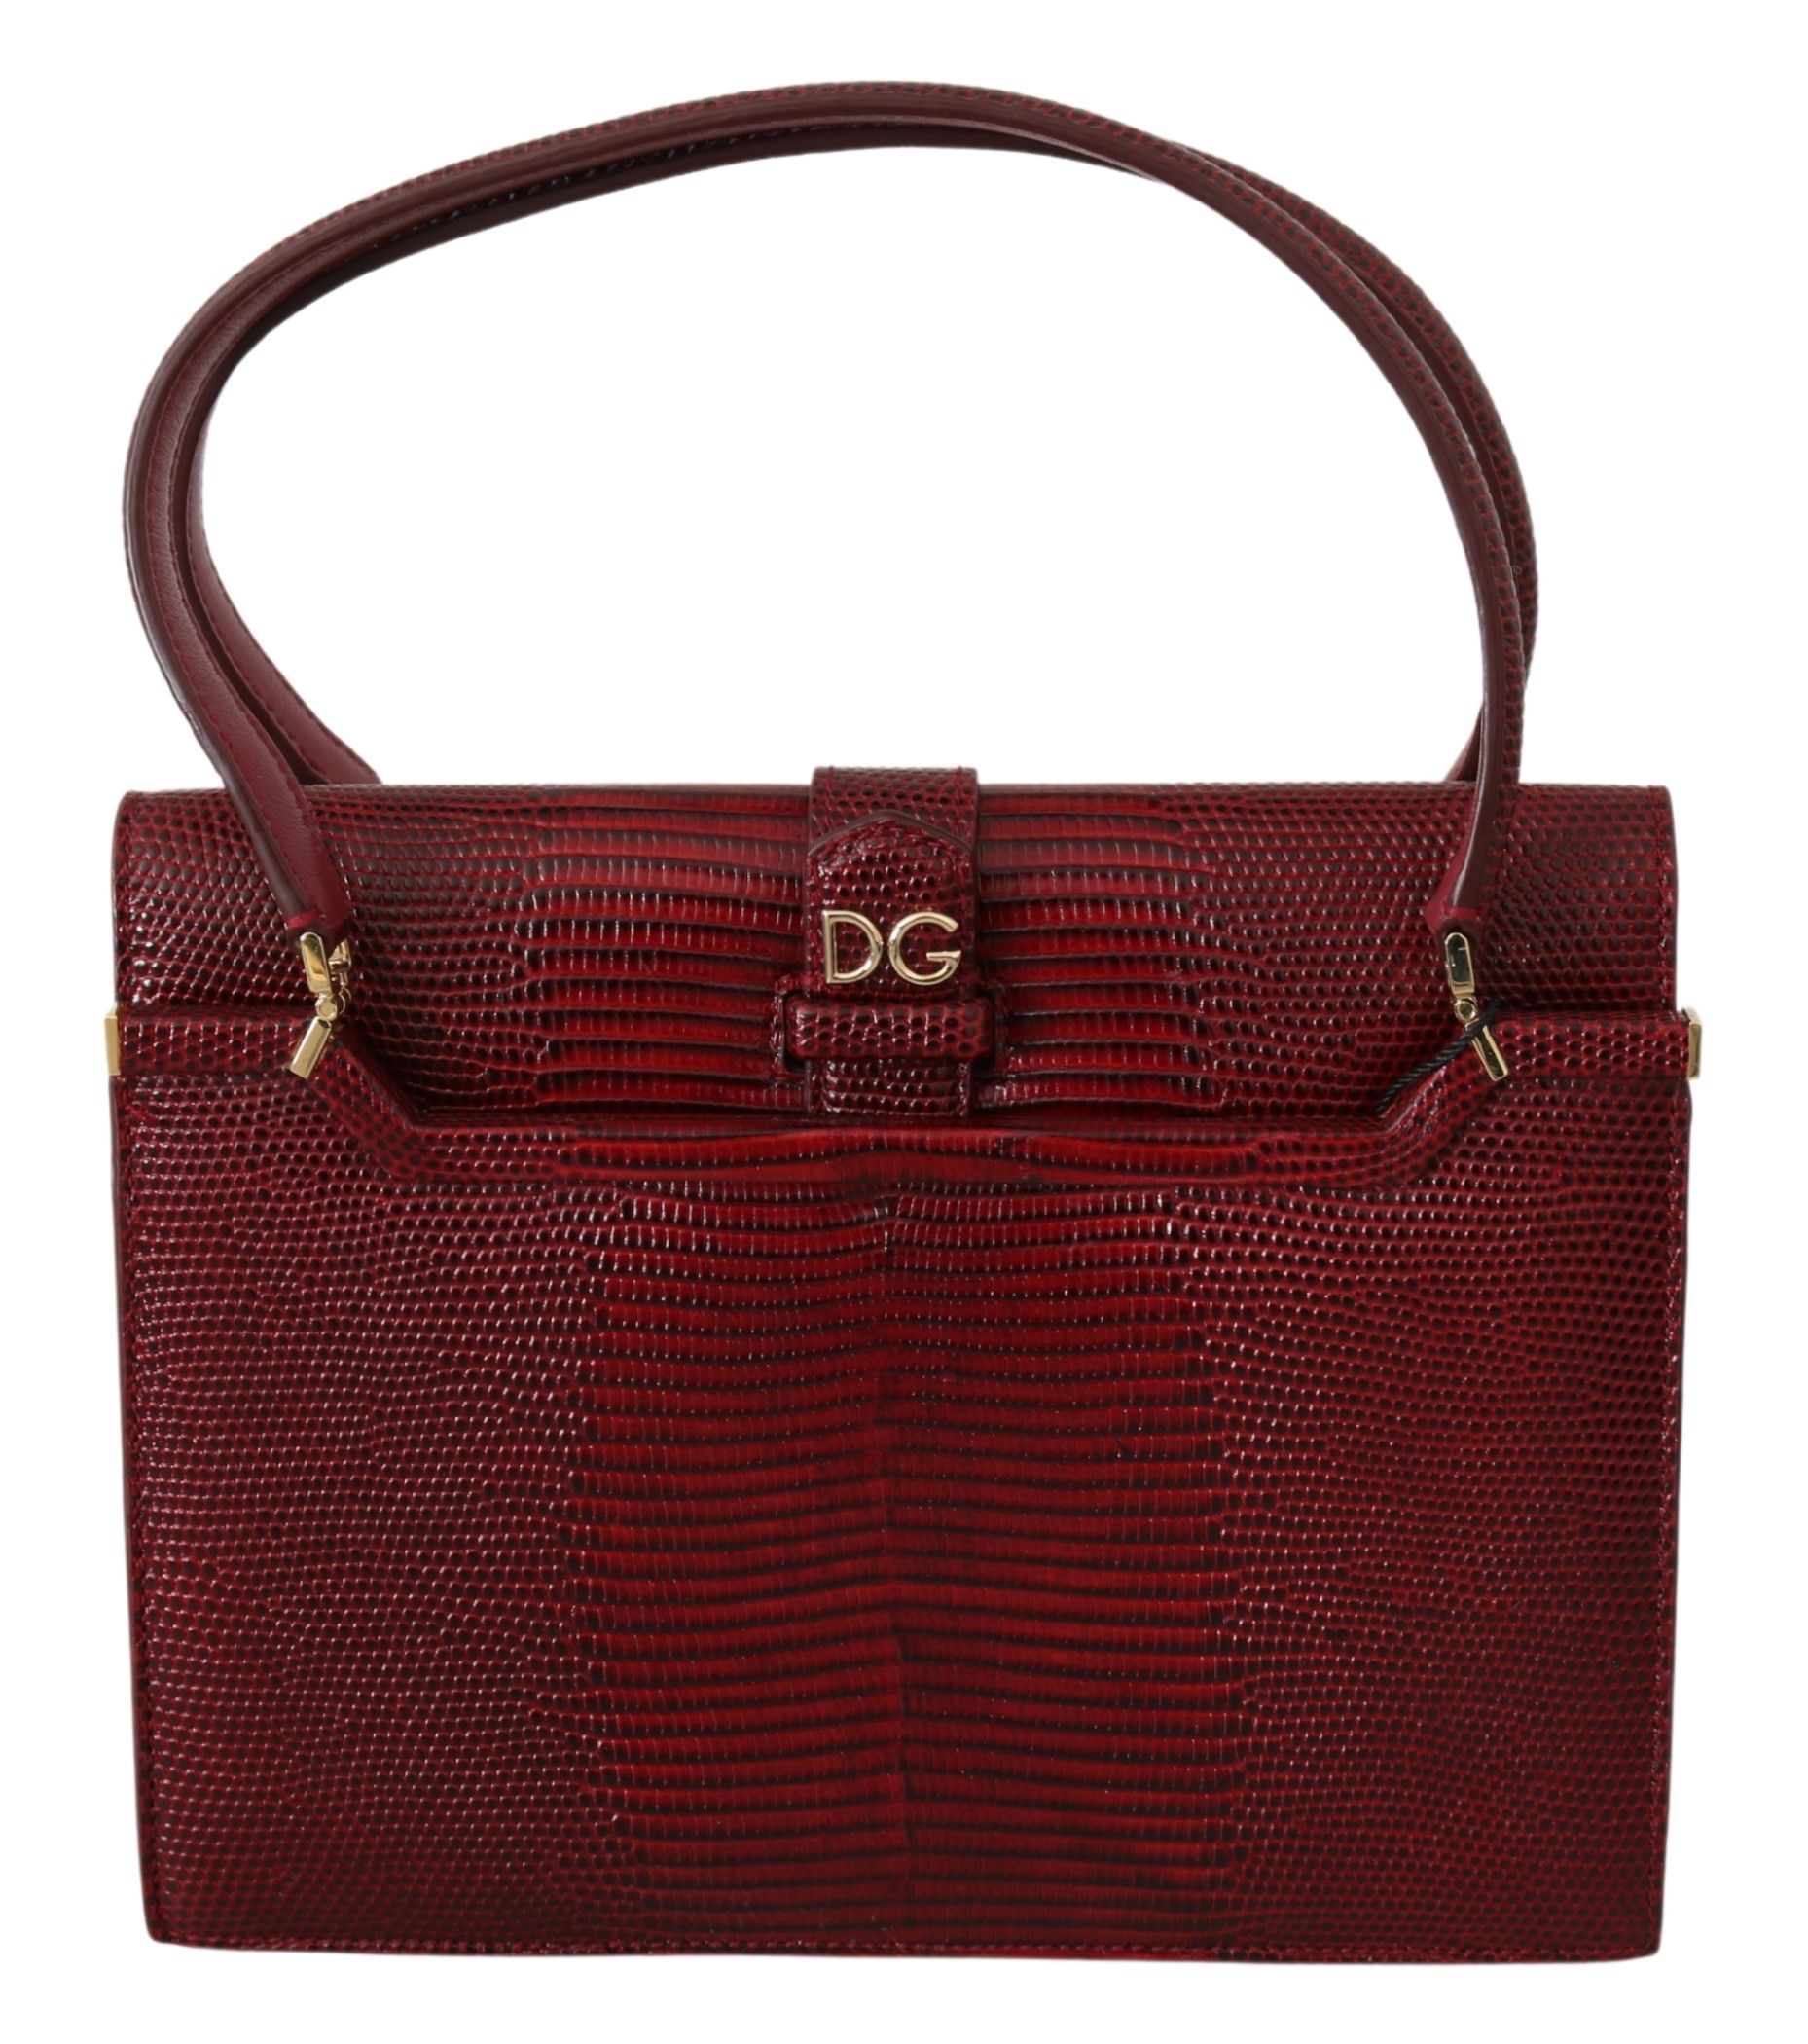 DOLCE & GABBANA. 
Gorgeous brand new with tags, 100% Authentic Dolce & Gabbana Women’s Bag.
Style: INGRID, Hand . bag
Color: . Bordeaux with gold metal detailing
Material: . Leather.  
Central compartment with three folding parts and an internal zip-up pocket with a smartphone pocket. 
Magnetic flap closure
Logo Details. 
Made in Italy. 
Measurements:  20.5 x 15 x 6cm 
8 x 5.9 x 2.3 inches